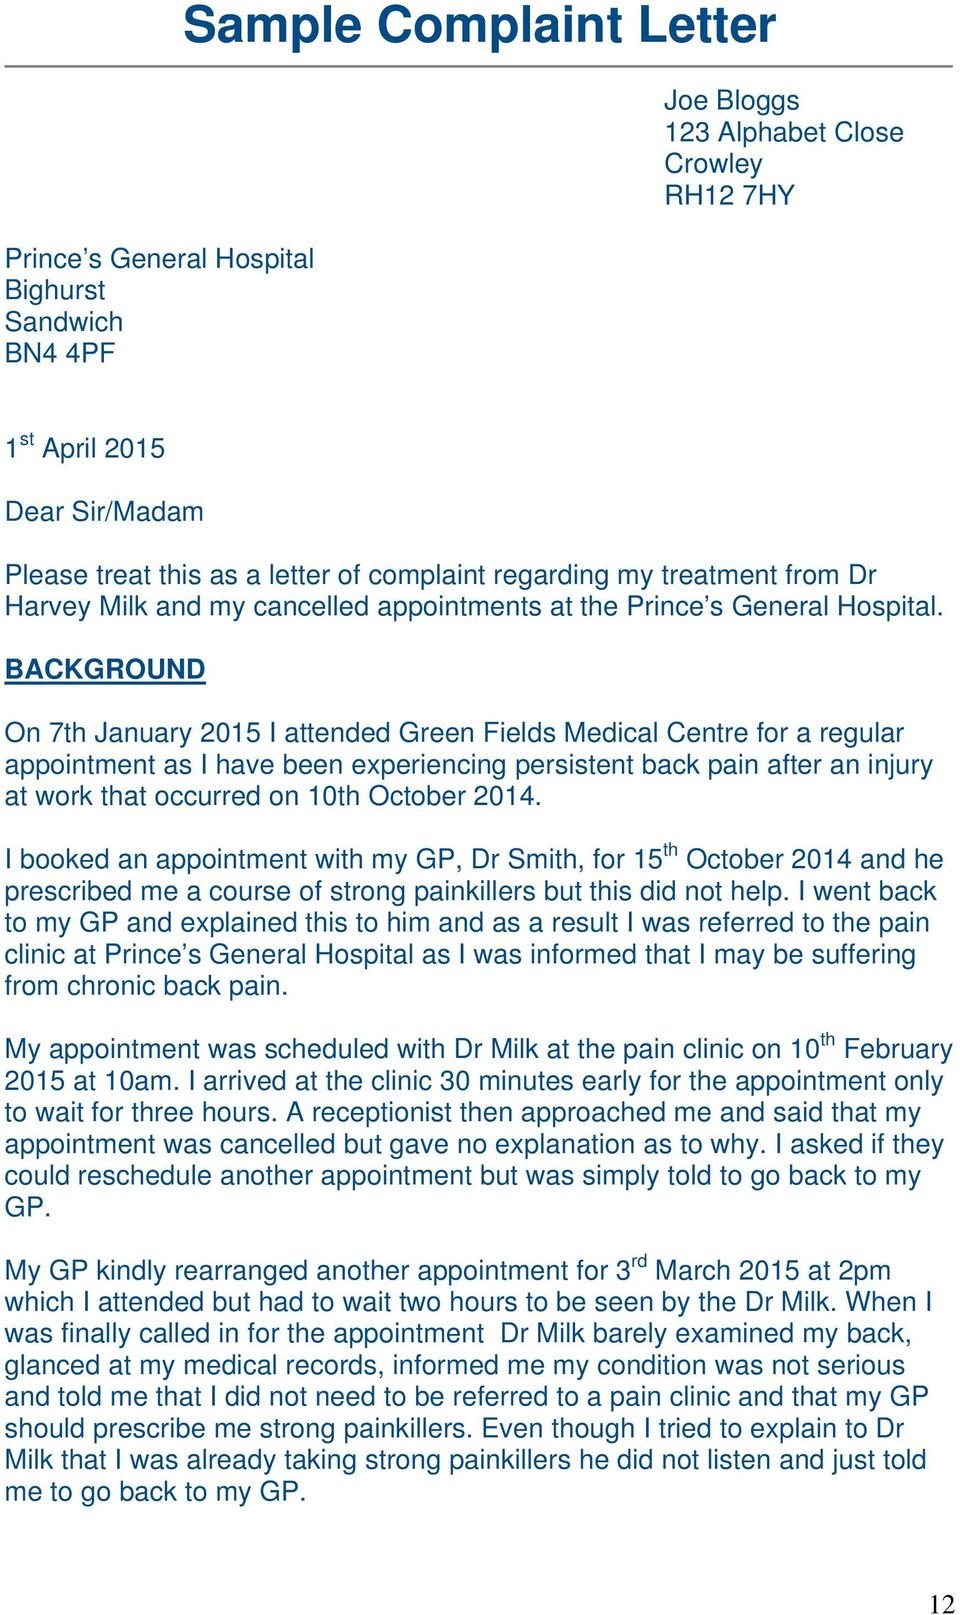 BACKGROUND On 7th January 2015 I attended Green Fields Medical Centre for a regular appointment as I have been experiencing persistent back pain after an injury at work that occurred on 10th October